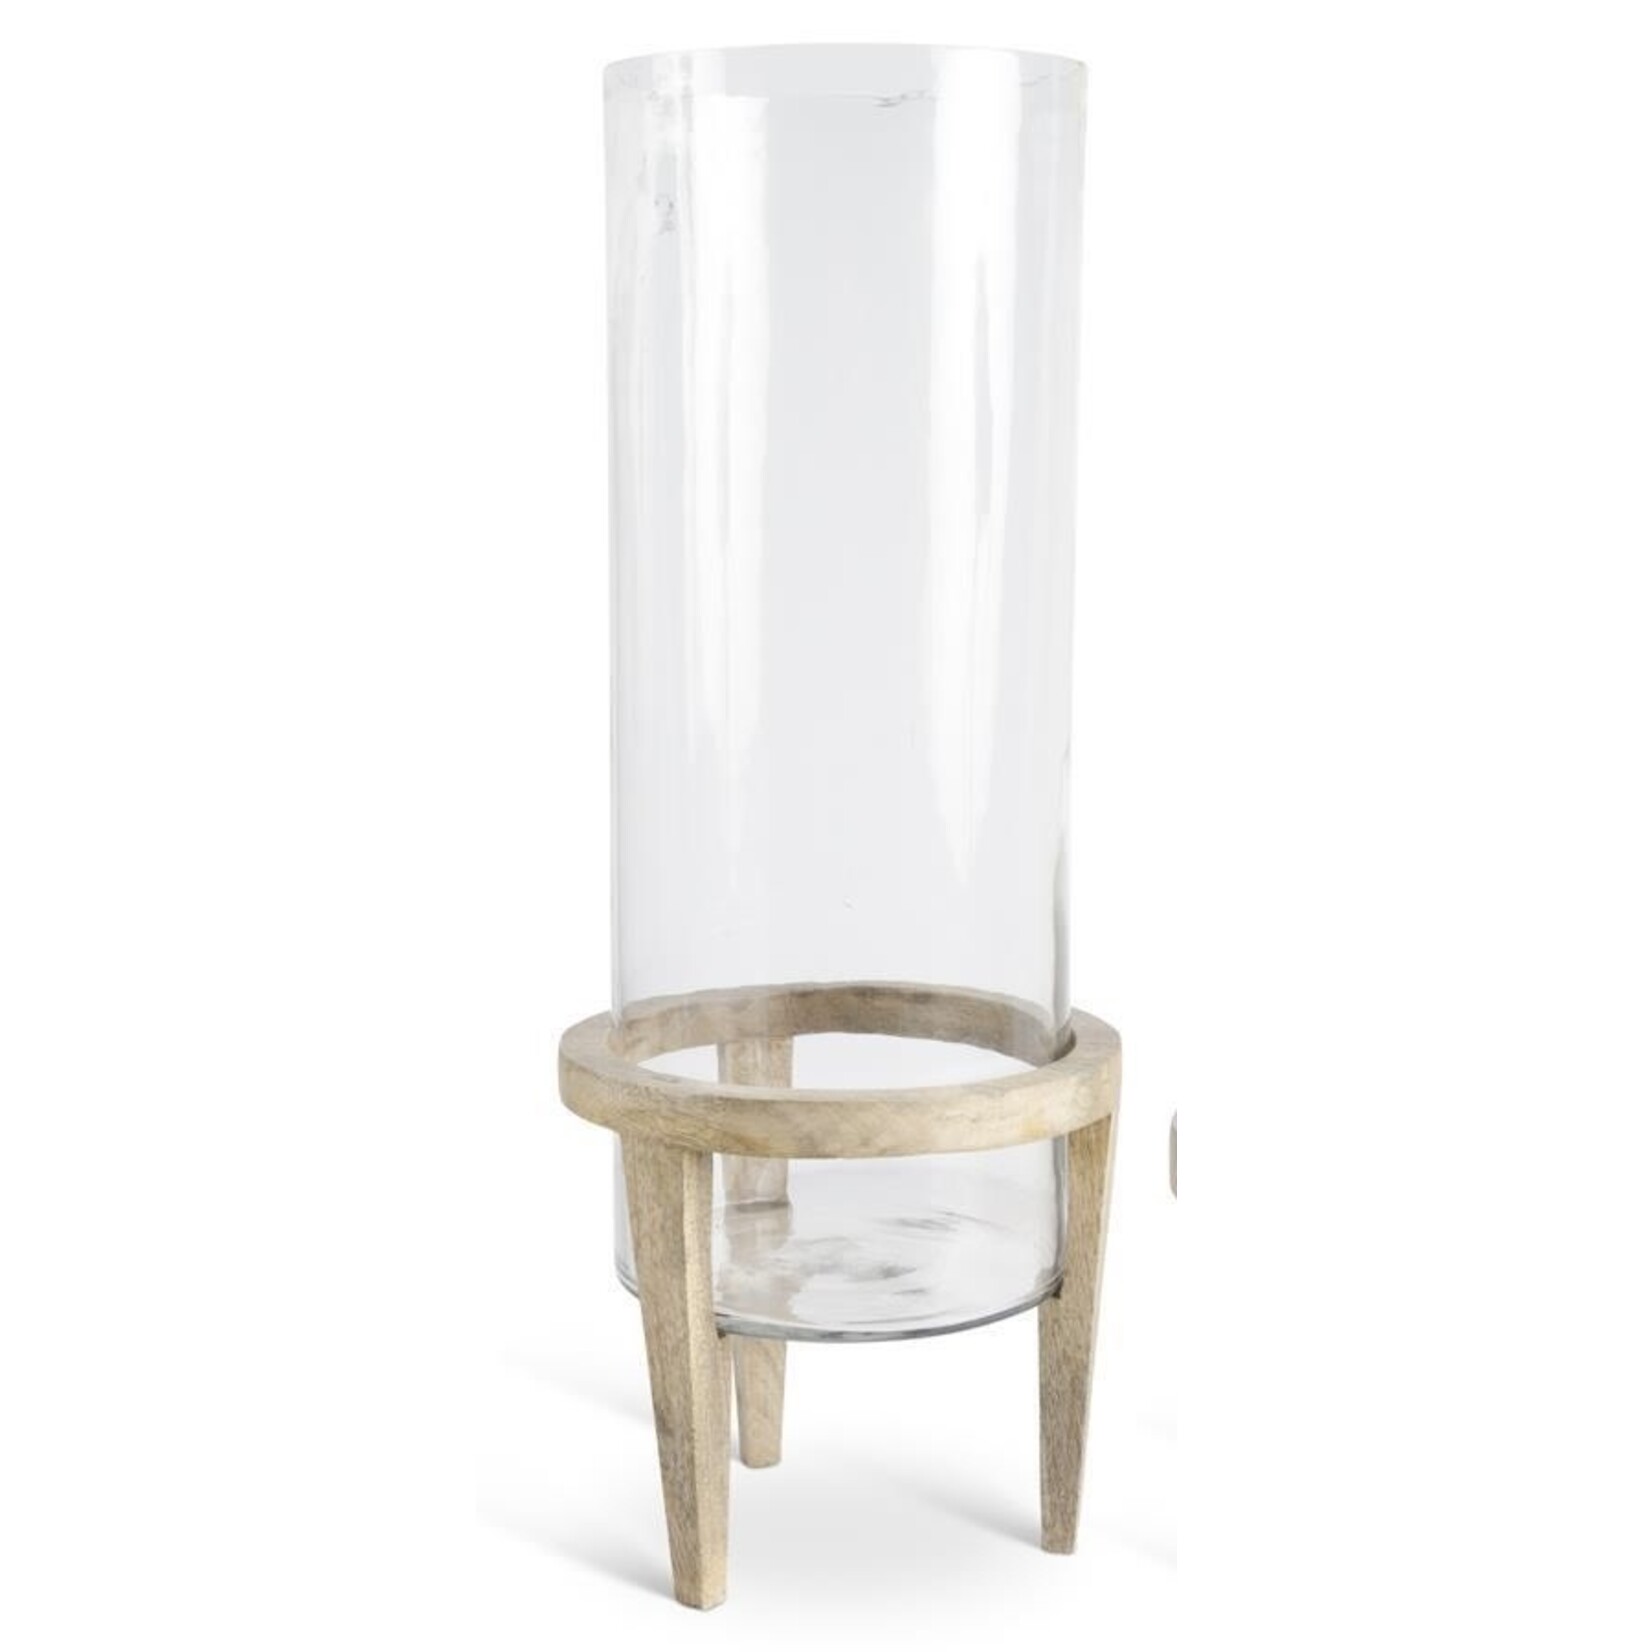 25.5 Inch Glass Cylinder with 3 Leg Wood Stand